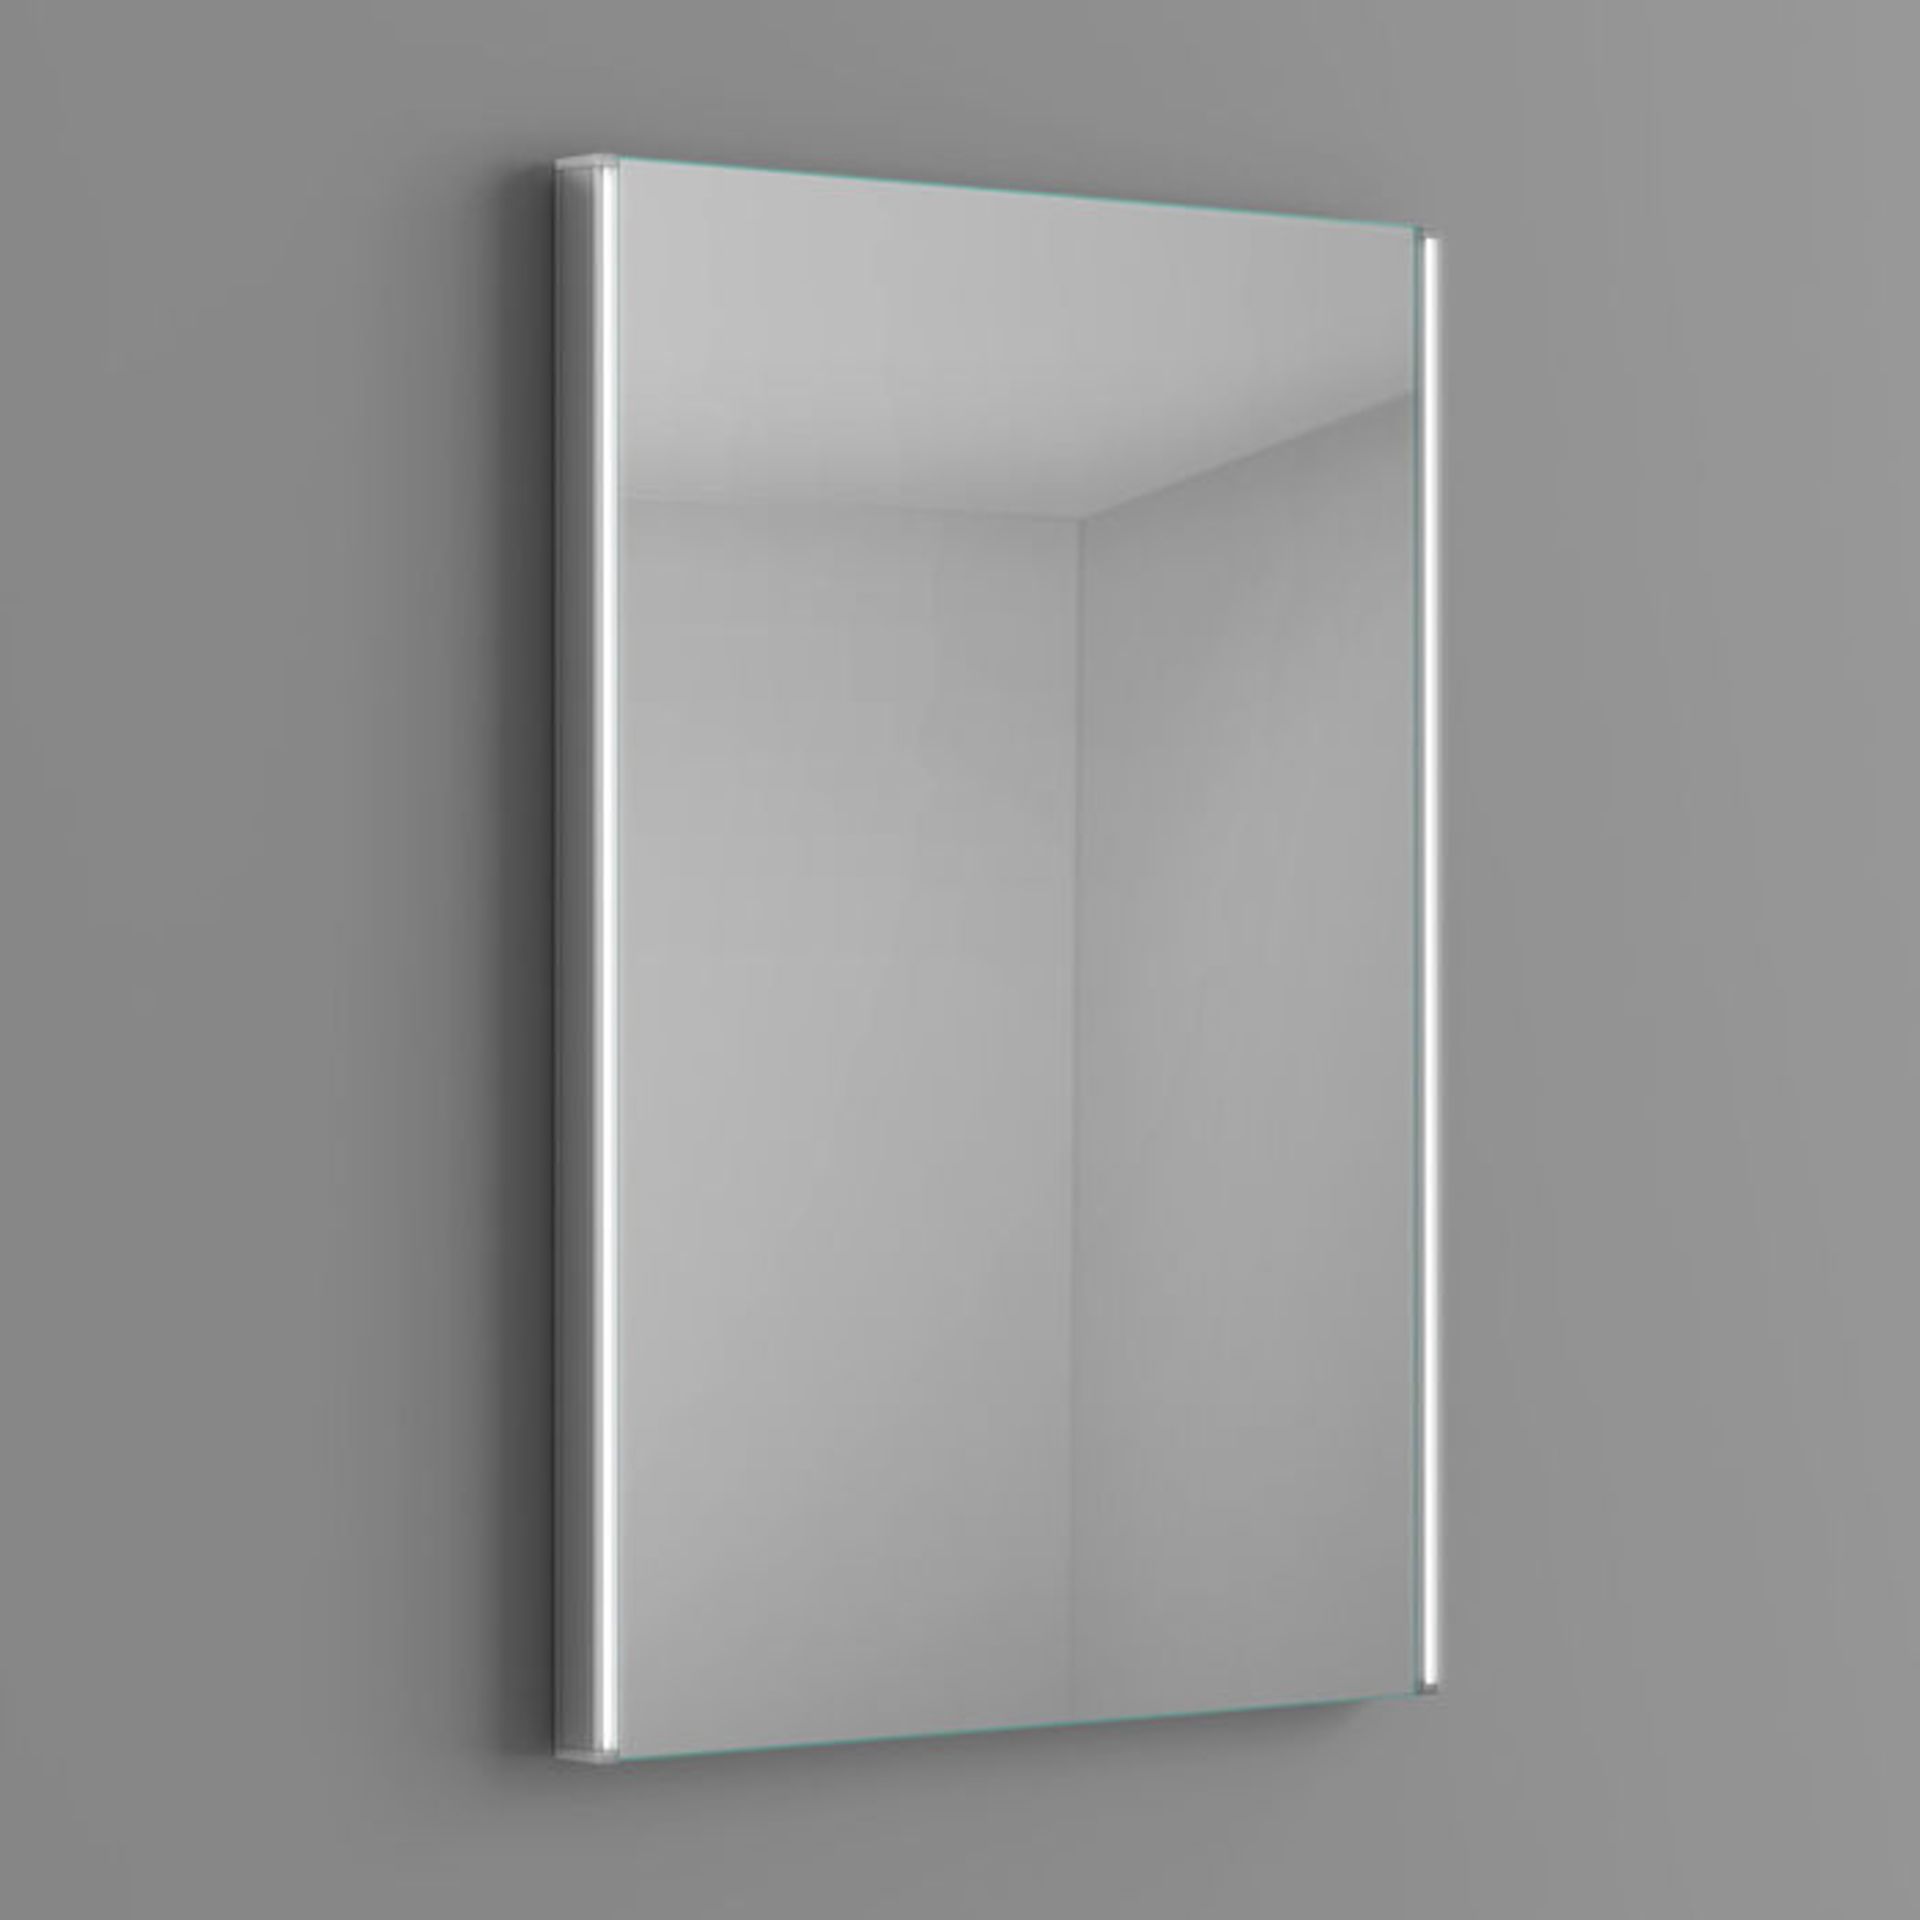 (H209)500x700mm Lunar LED Mirror - Battery Operated. Energy saving controlled On / Off switch - Image 5 of 5